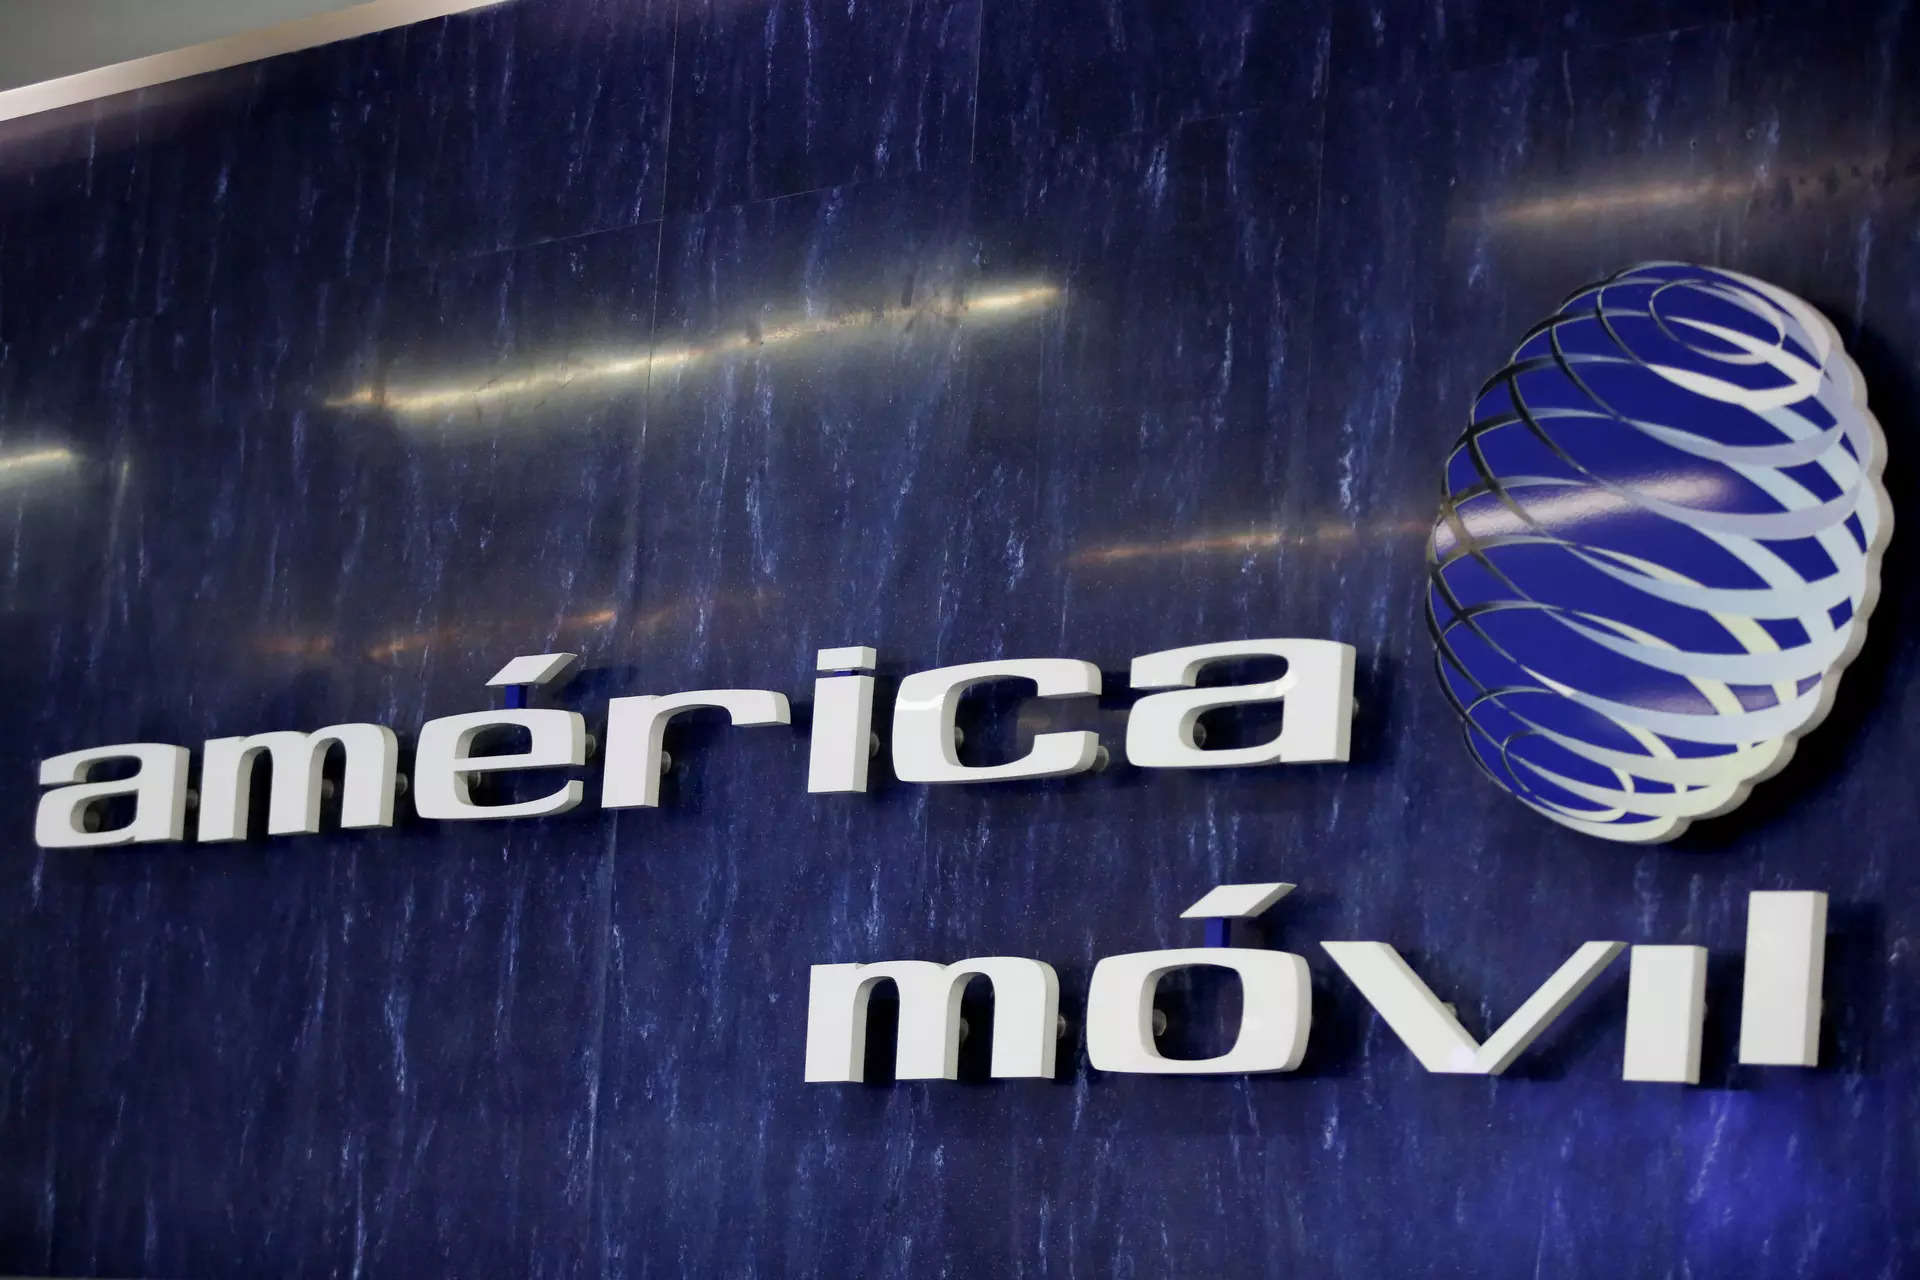 <p>FILE PHOTO: The logo of America Movil is pictured on the wall at a reception area in the company's corporate offices, in Mexico City, Mexico January 25, 2022. REUTERS/Gustavo Graf/File Photo</p>